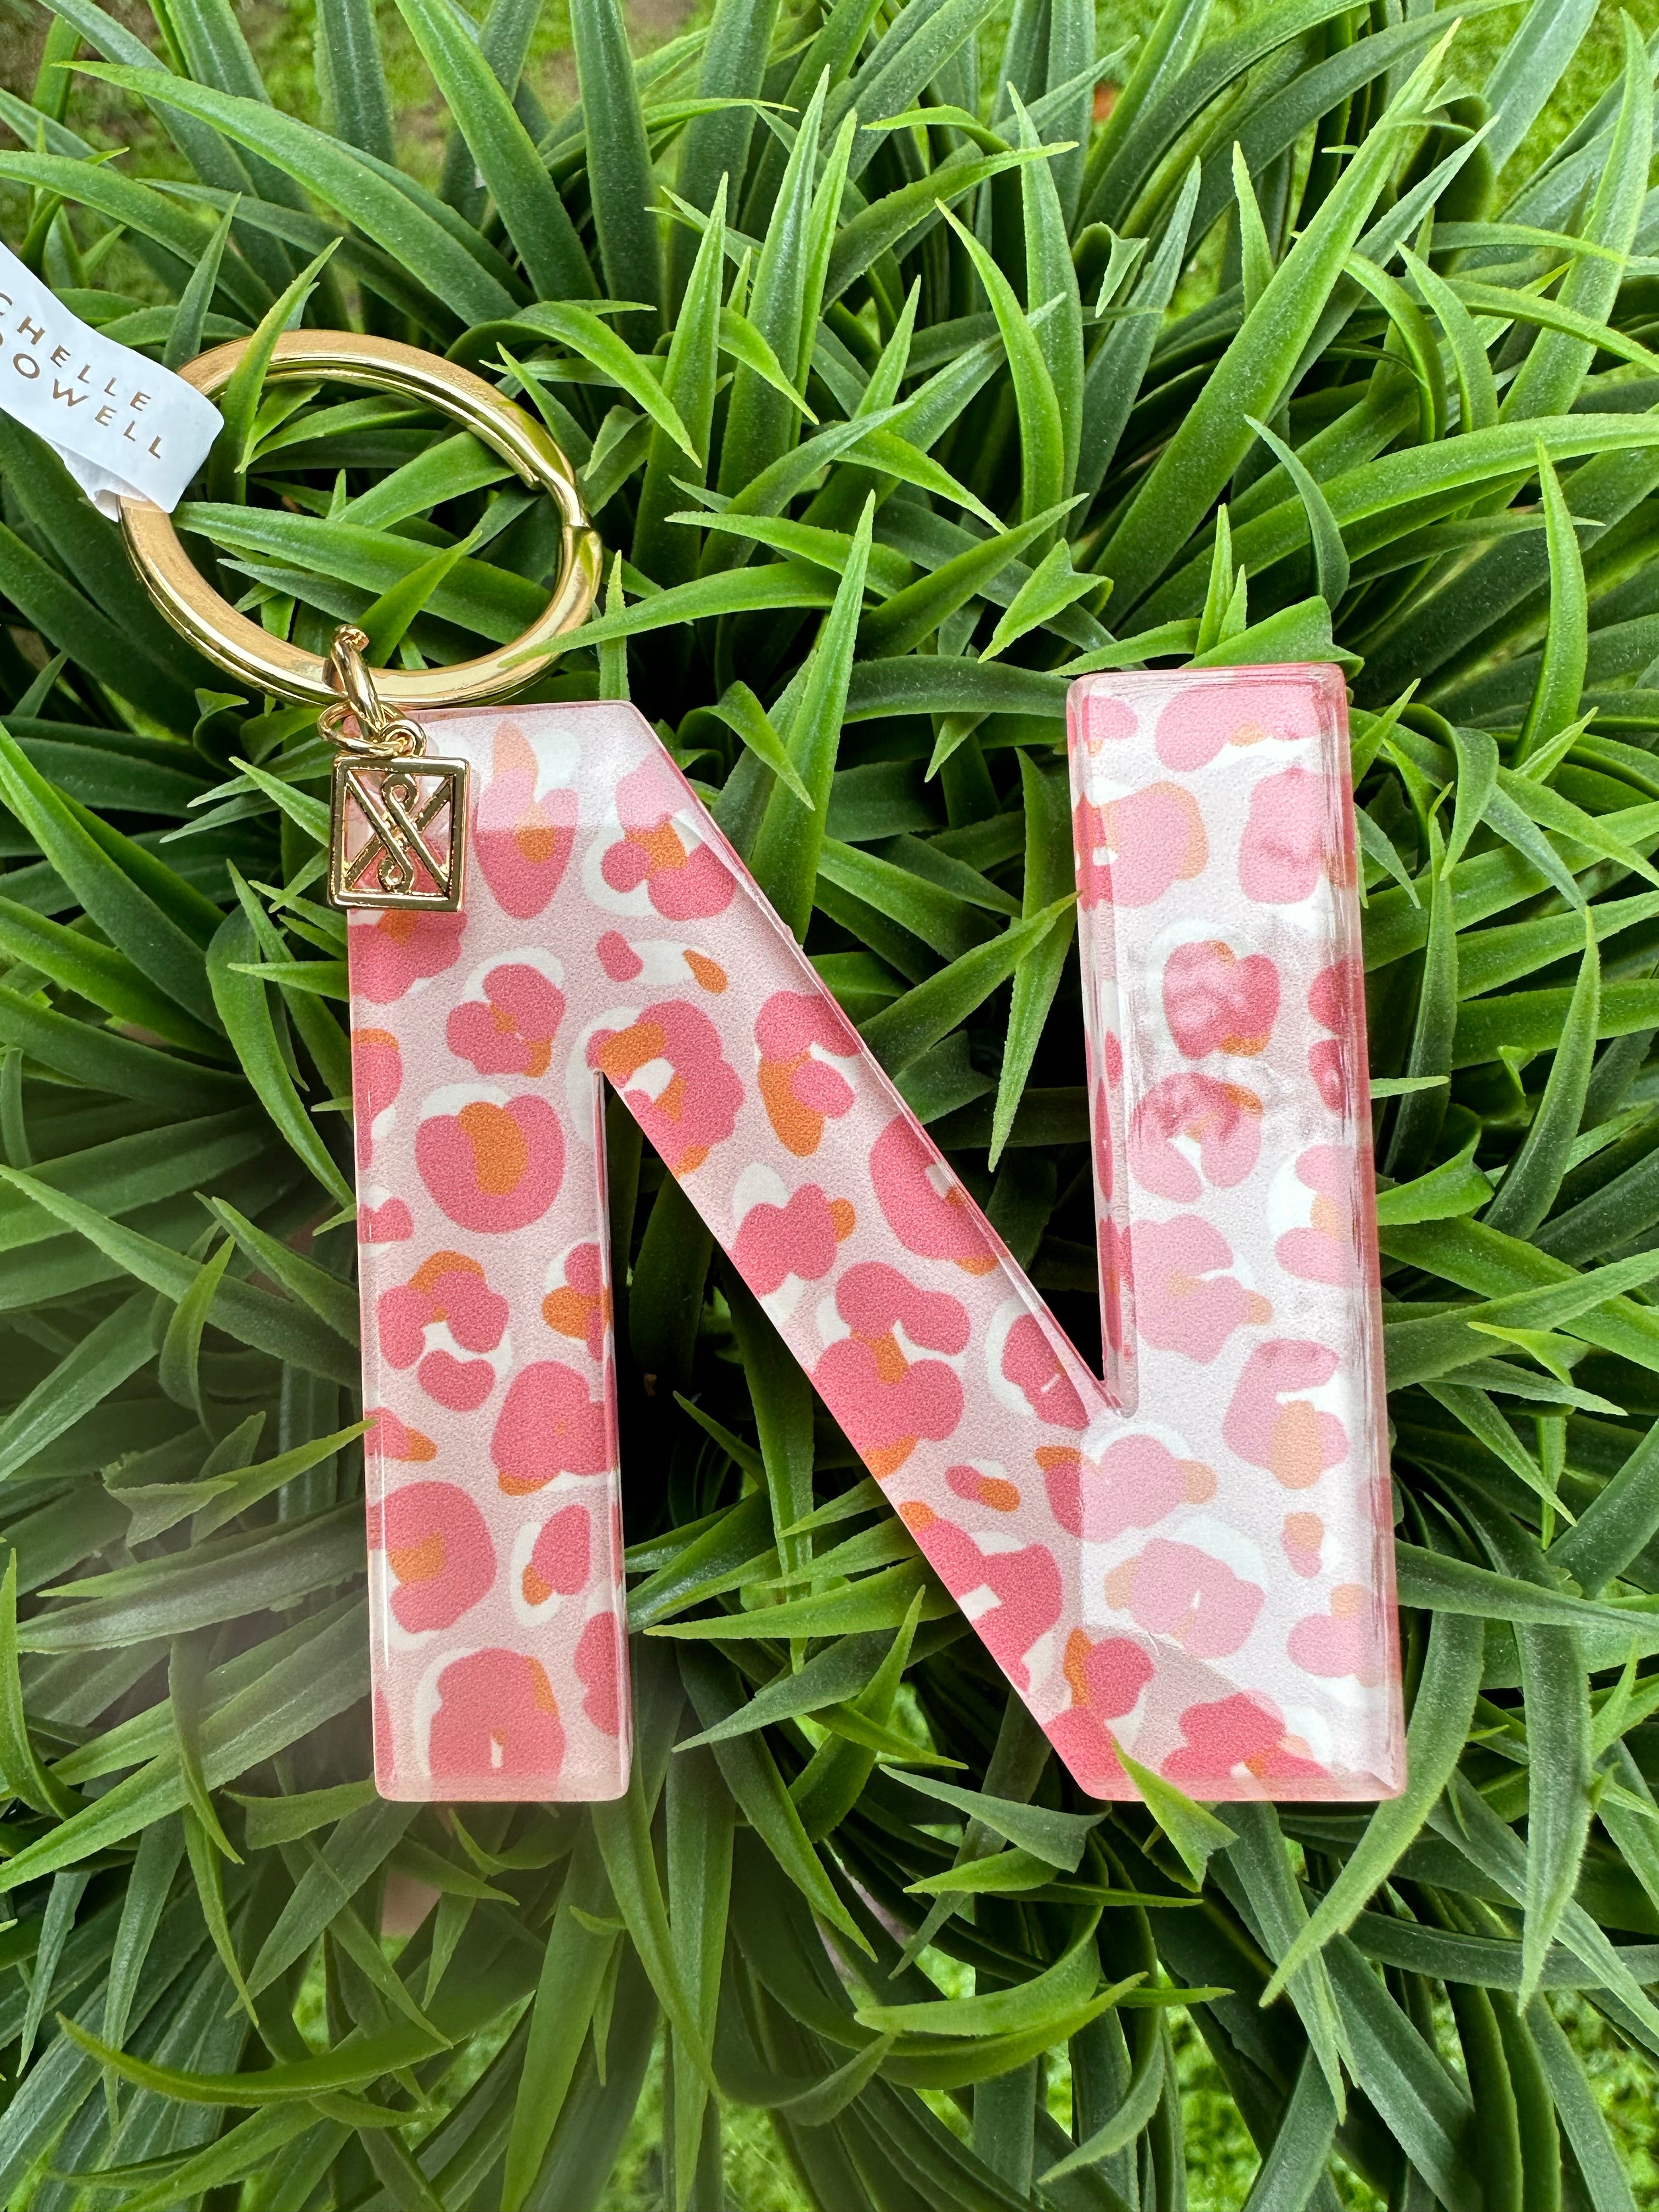 PATTERNED "N" KEYCHAIN